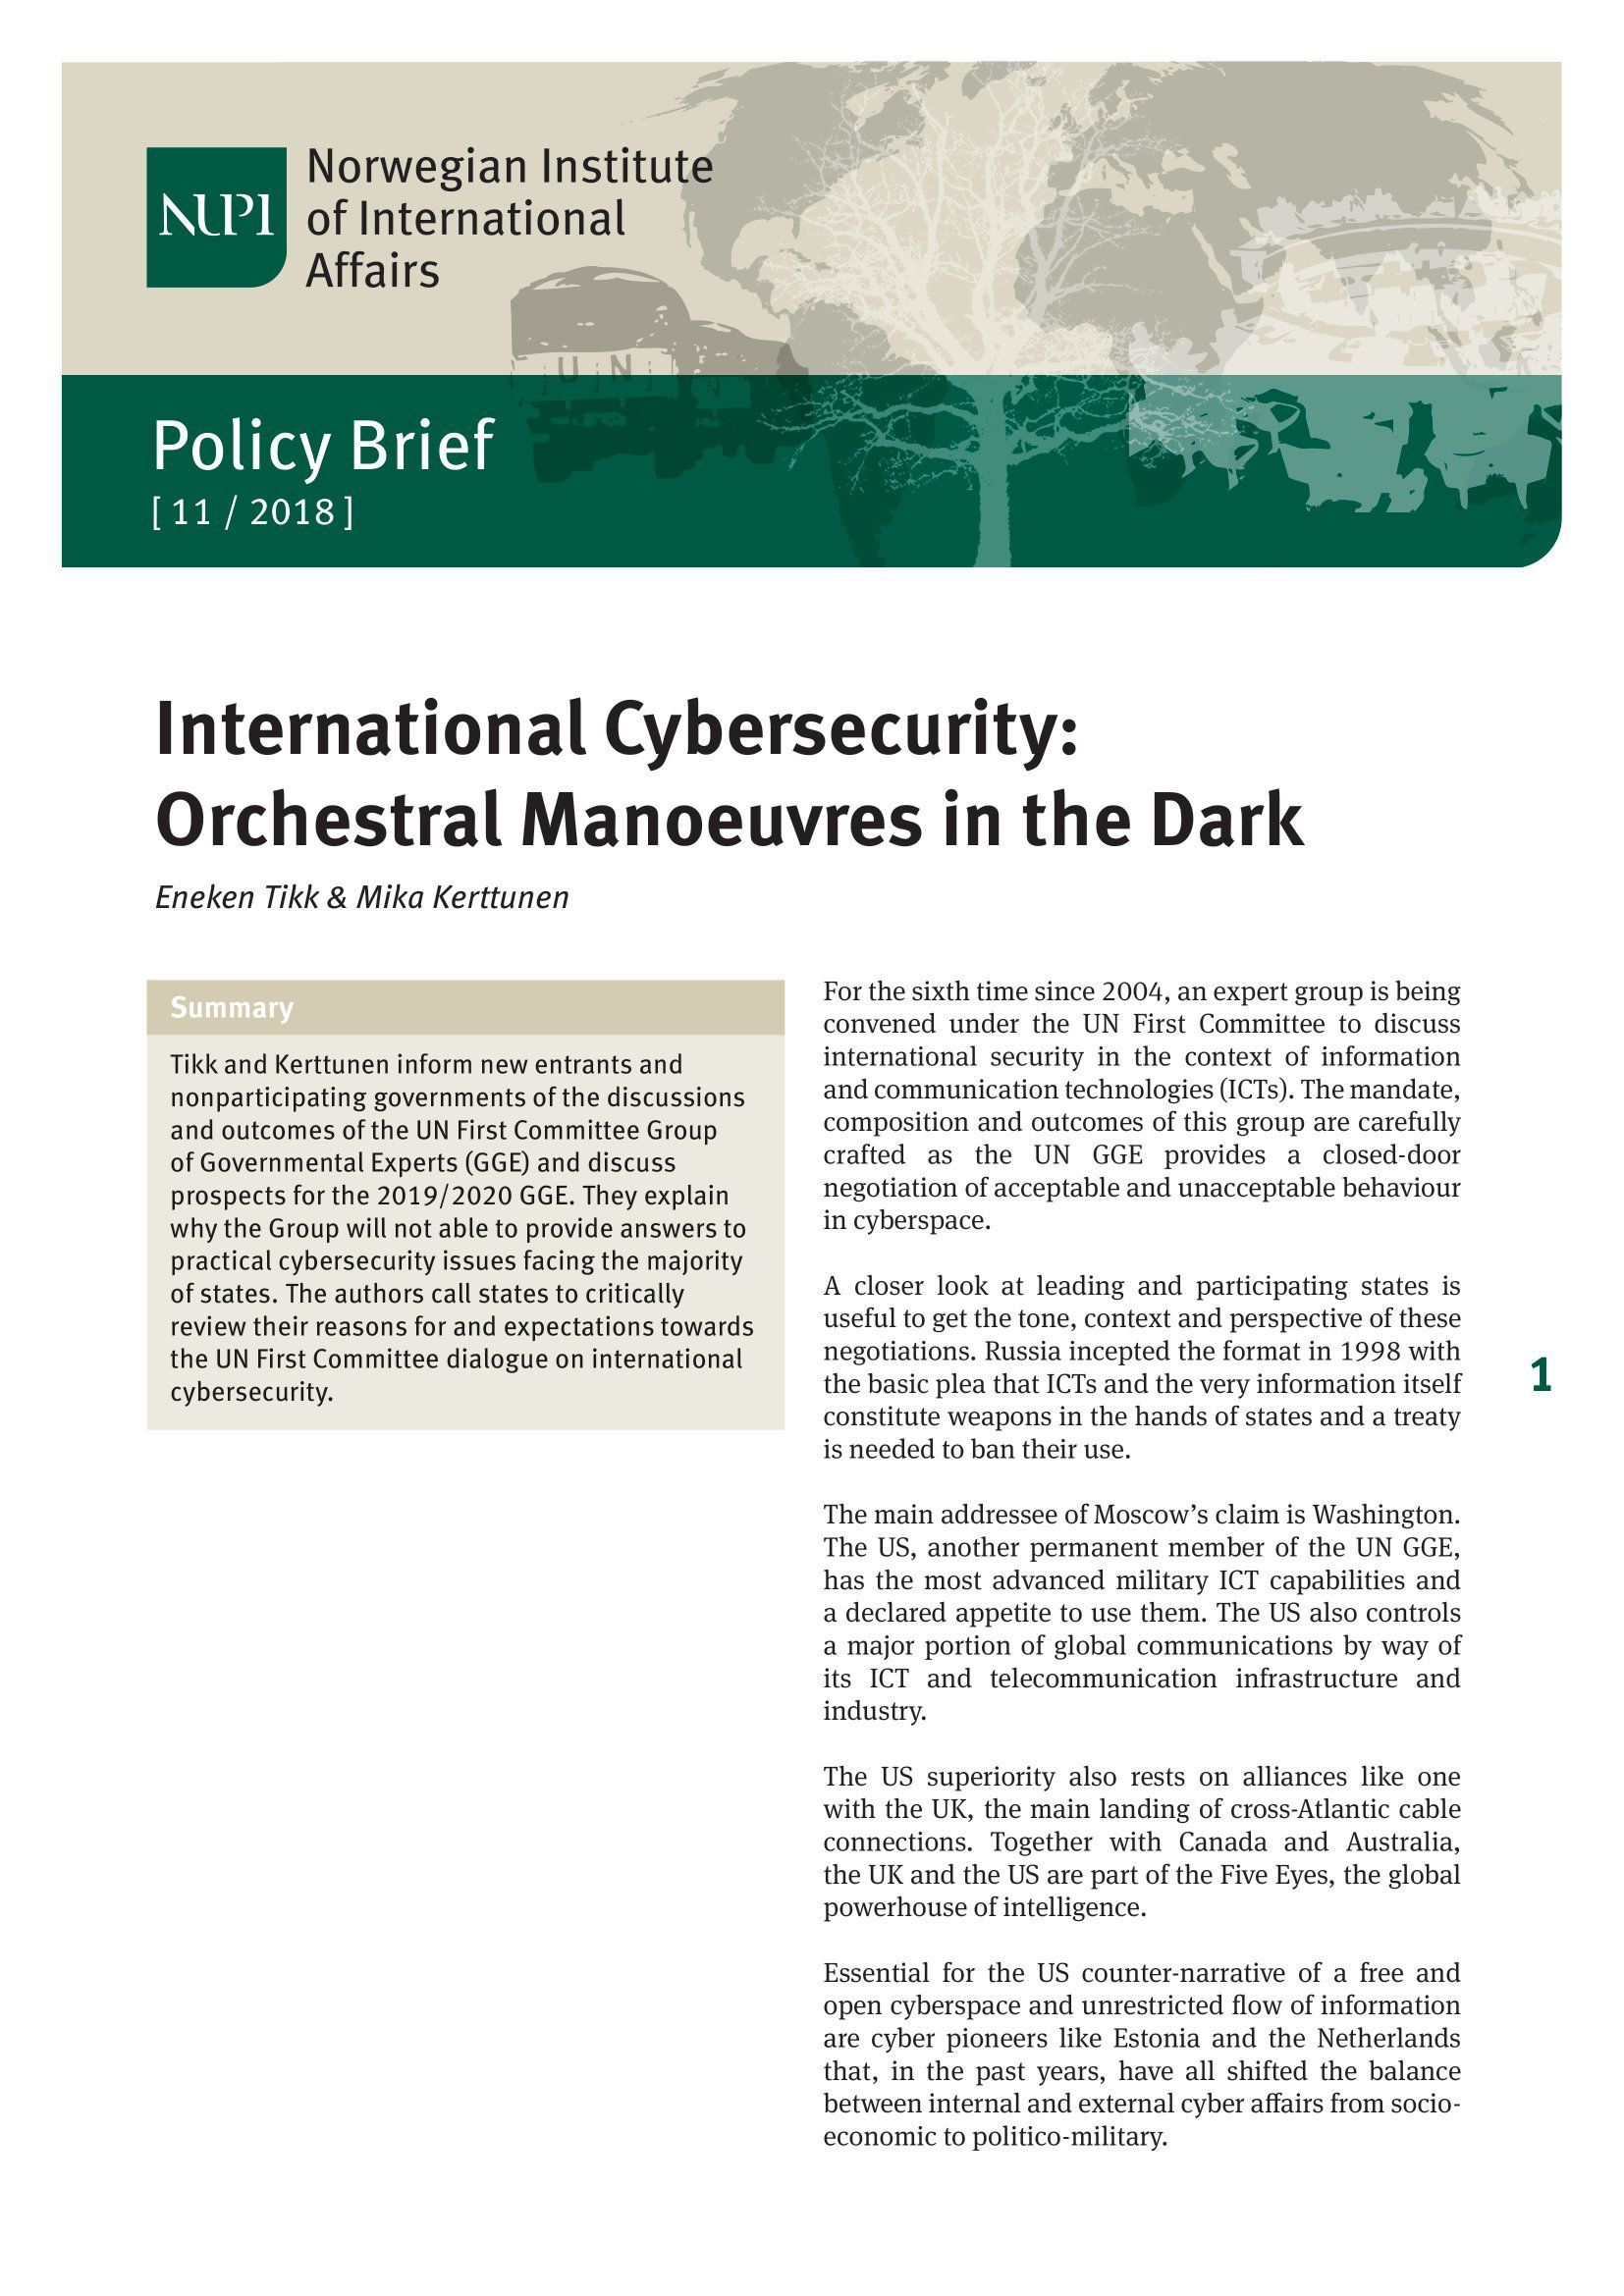 International Cybersecurity: Orchestral Manoeuvres in the Dark